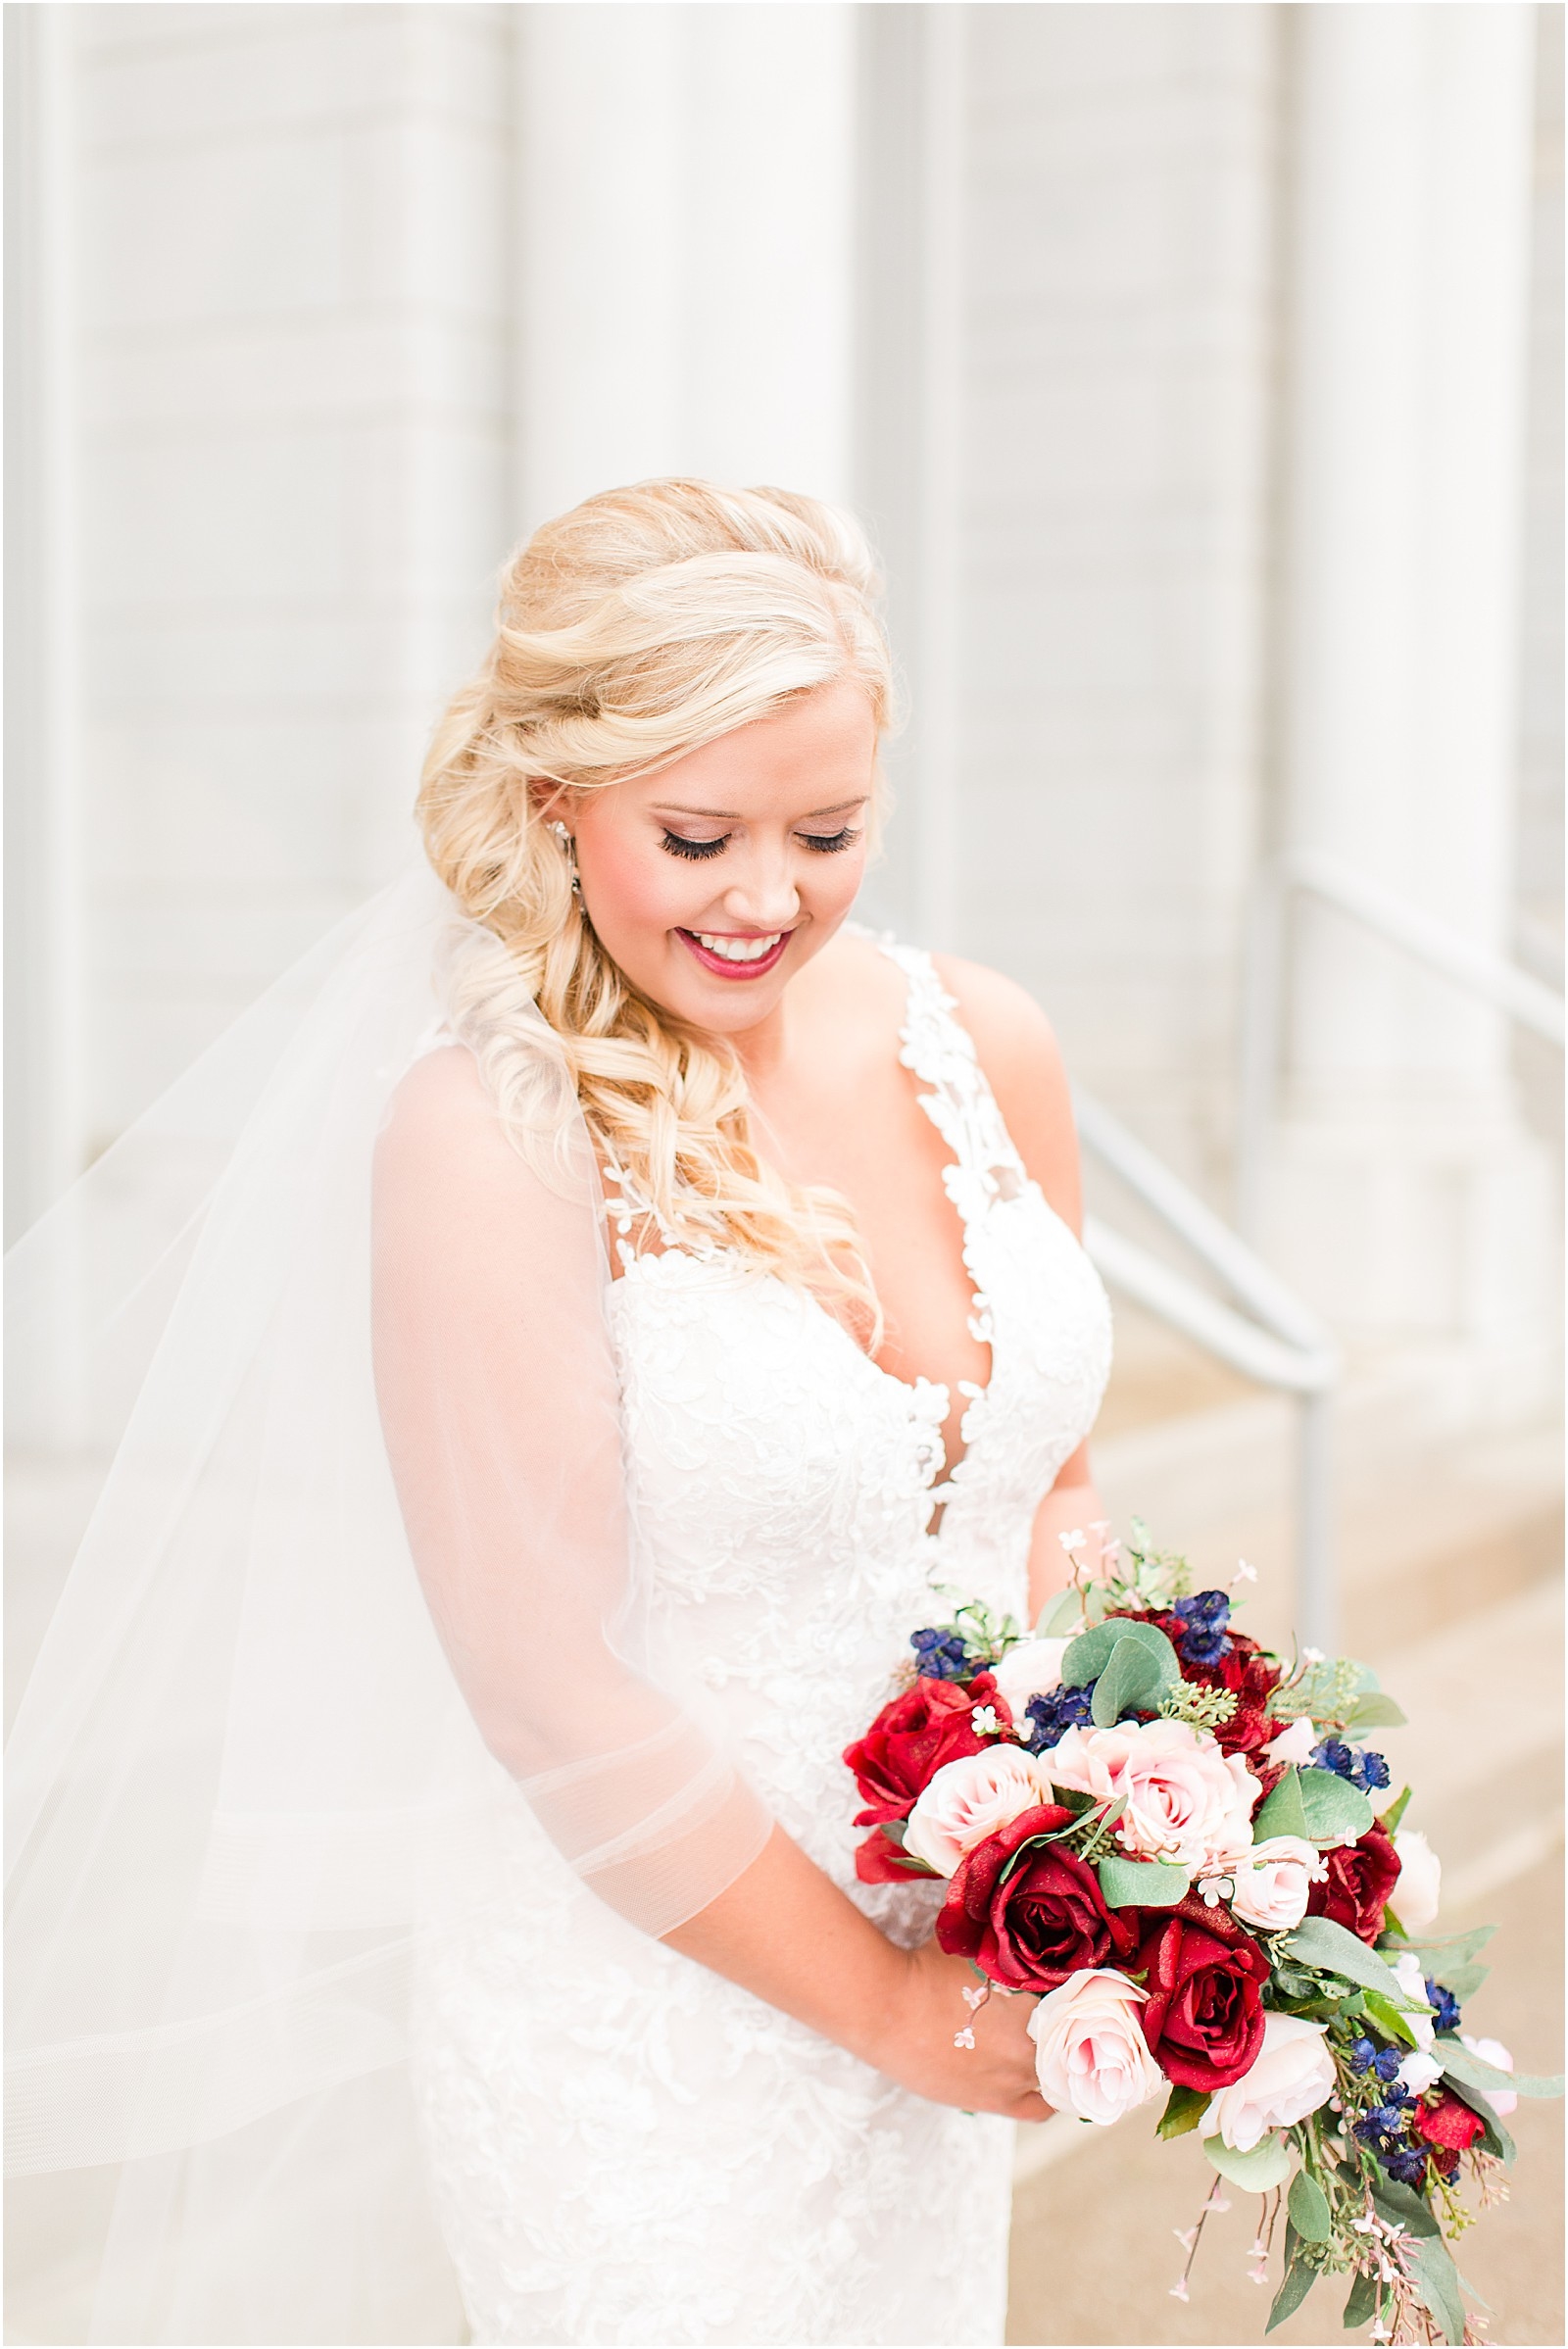 Haylee and Dillon's Evansville, Indiana wedding by Bret and Brandie Photography.0053.jpg